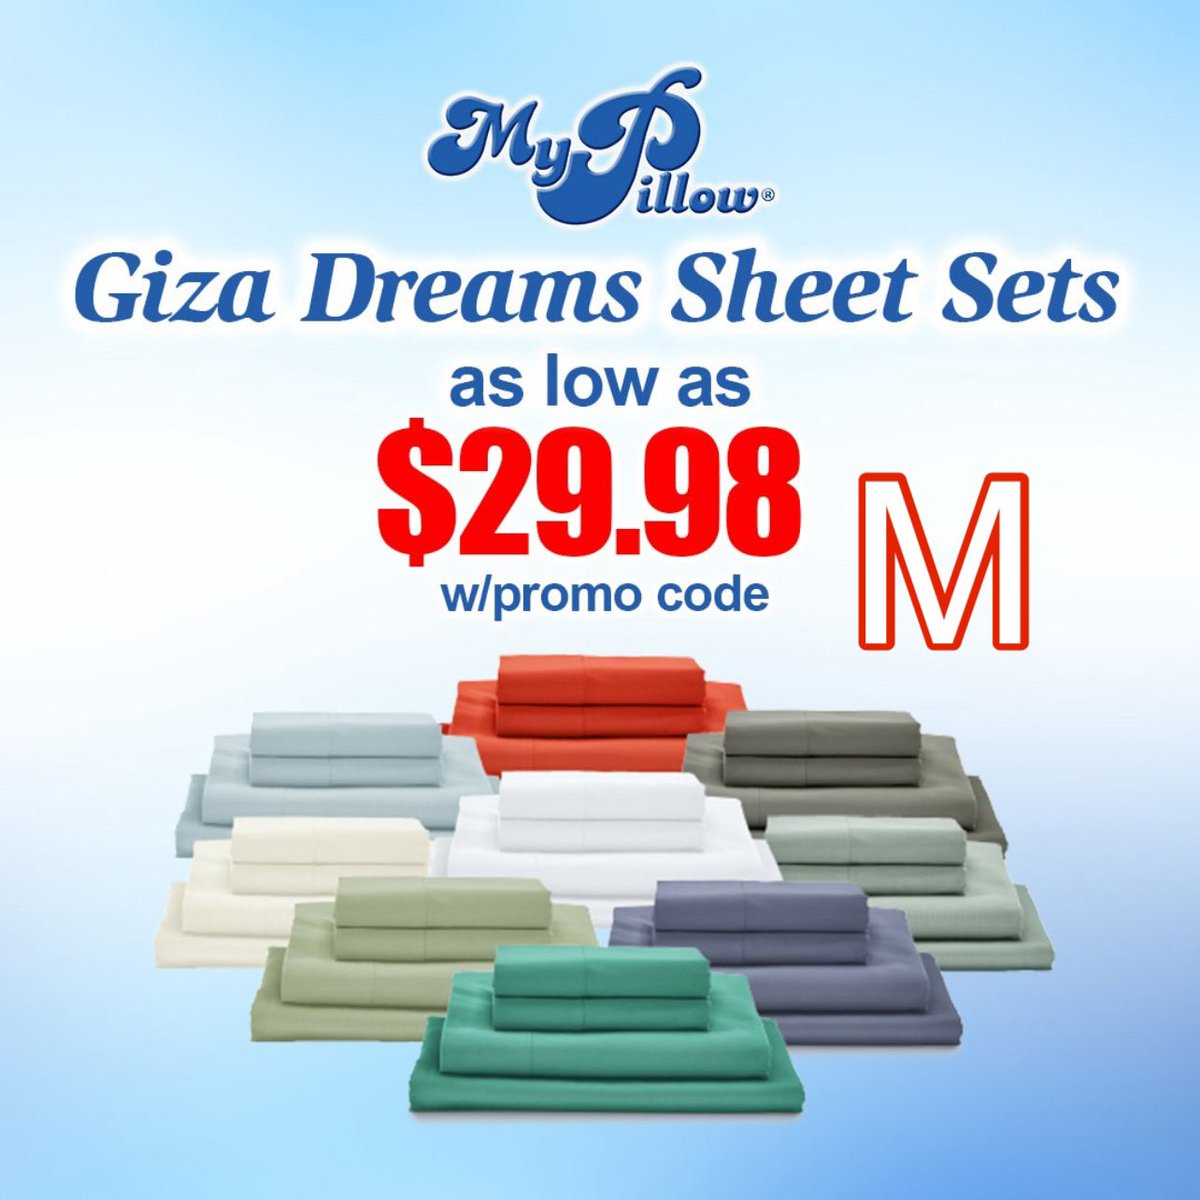 Experience the ultimate luxury of sleeping on #MyPillow's Giza Dreams Sheet Sets! Feel like you're drifting off in a dream with the softest, most comfortable sheets ever. And guess what? You can get them for as low as $29.98 with promo code 👉M👈. Don't miss out on this amazing